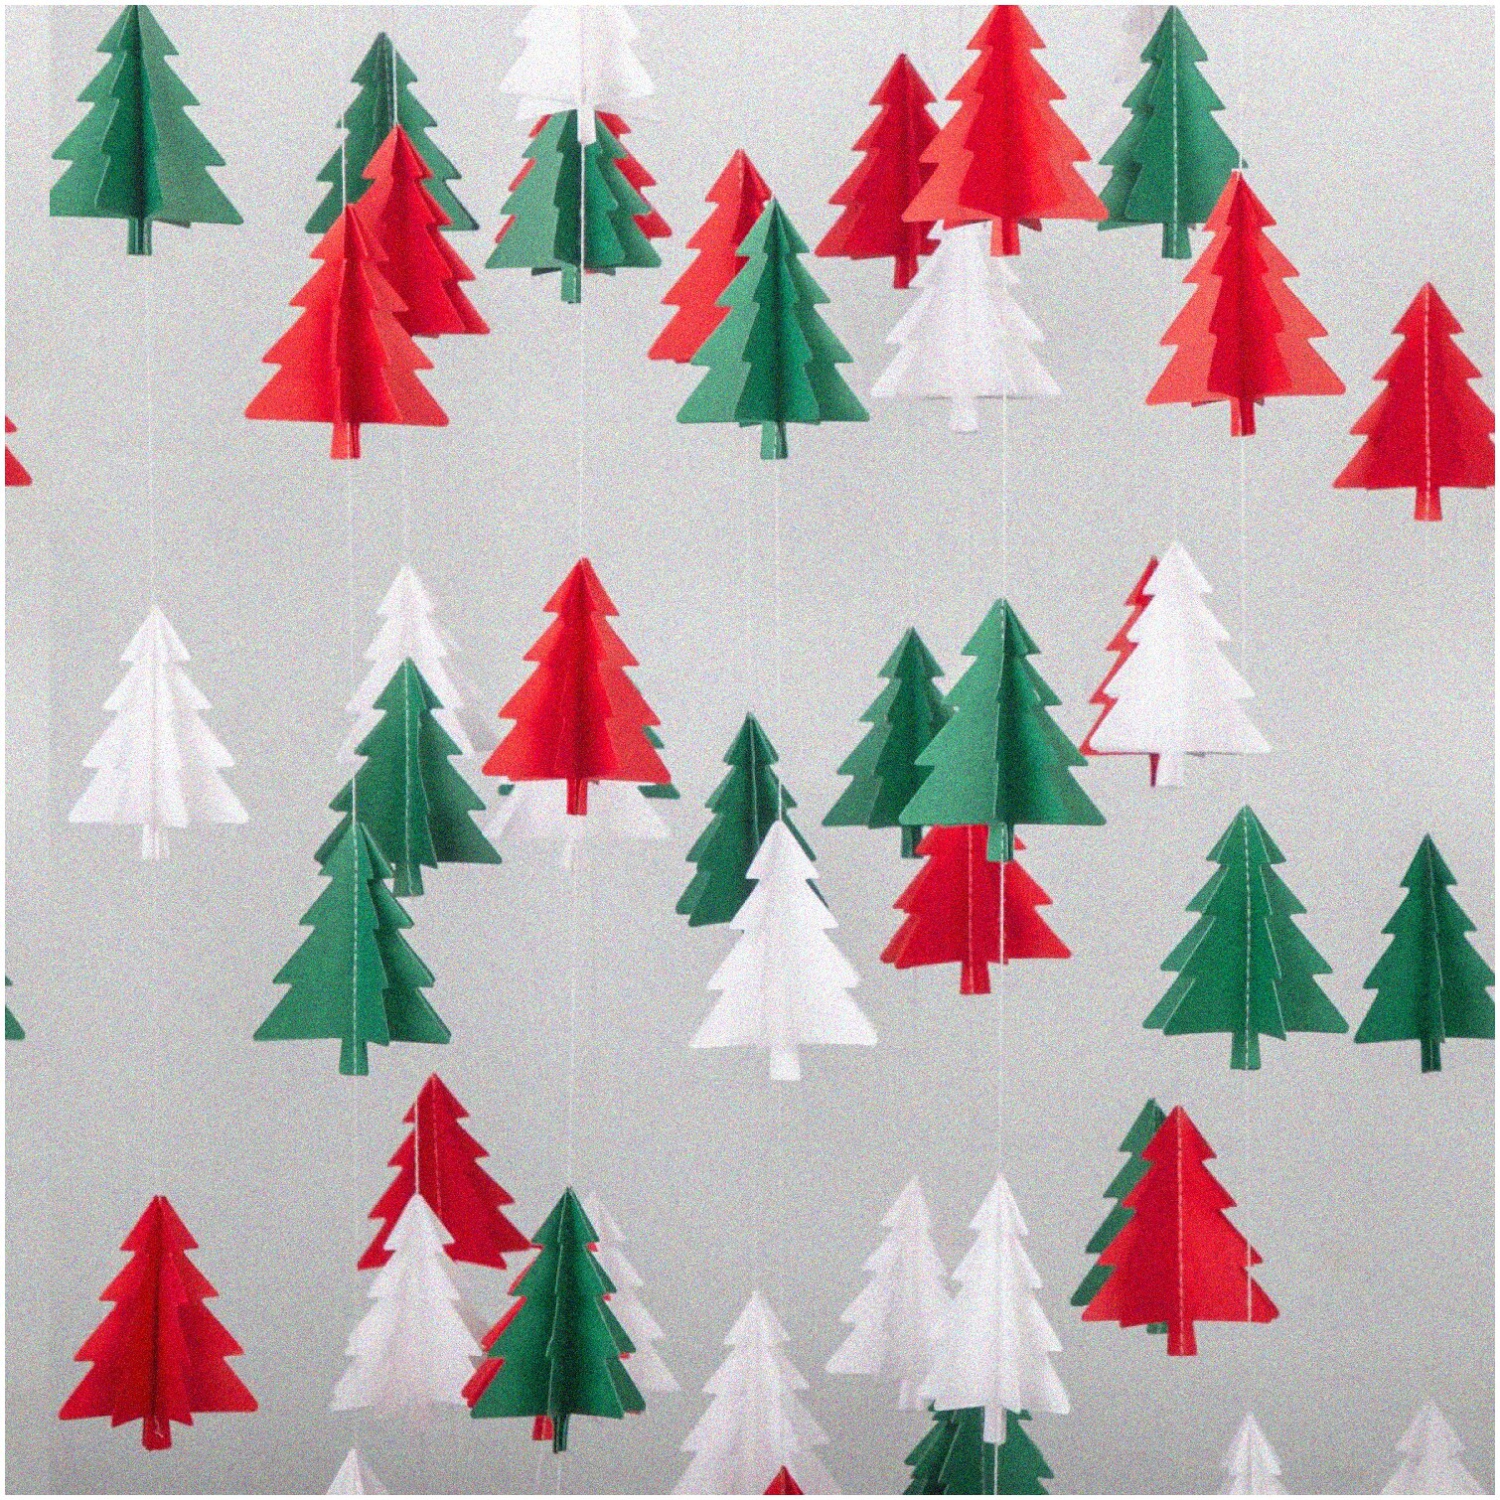 3D Tree Paper Streamers - Festive Red White Green Party Banner Garland for Hanging Decorations - Set of 2pcs